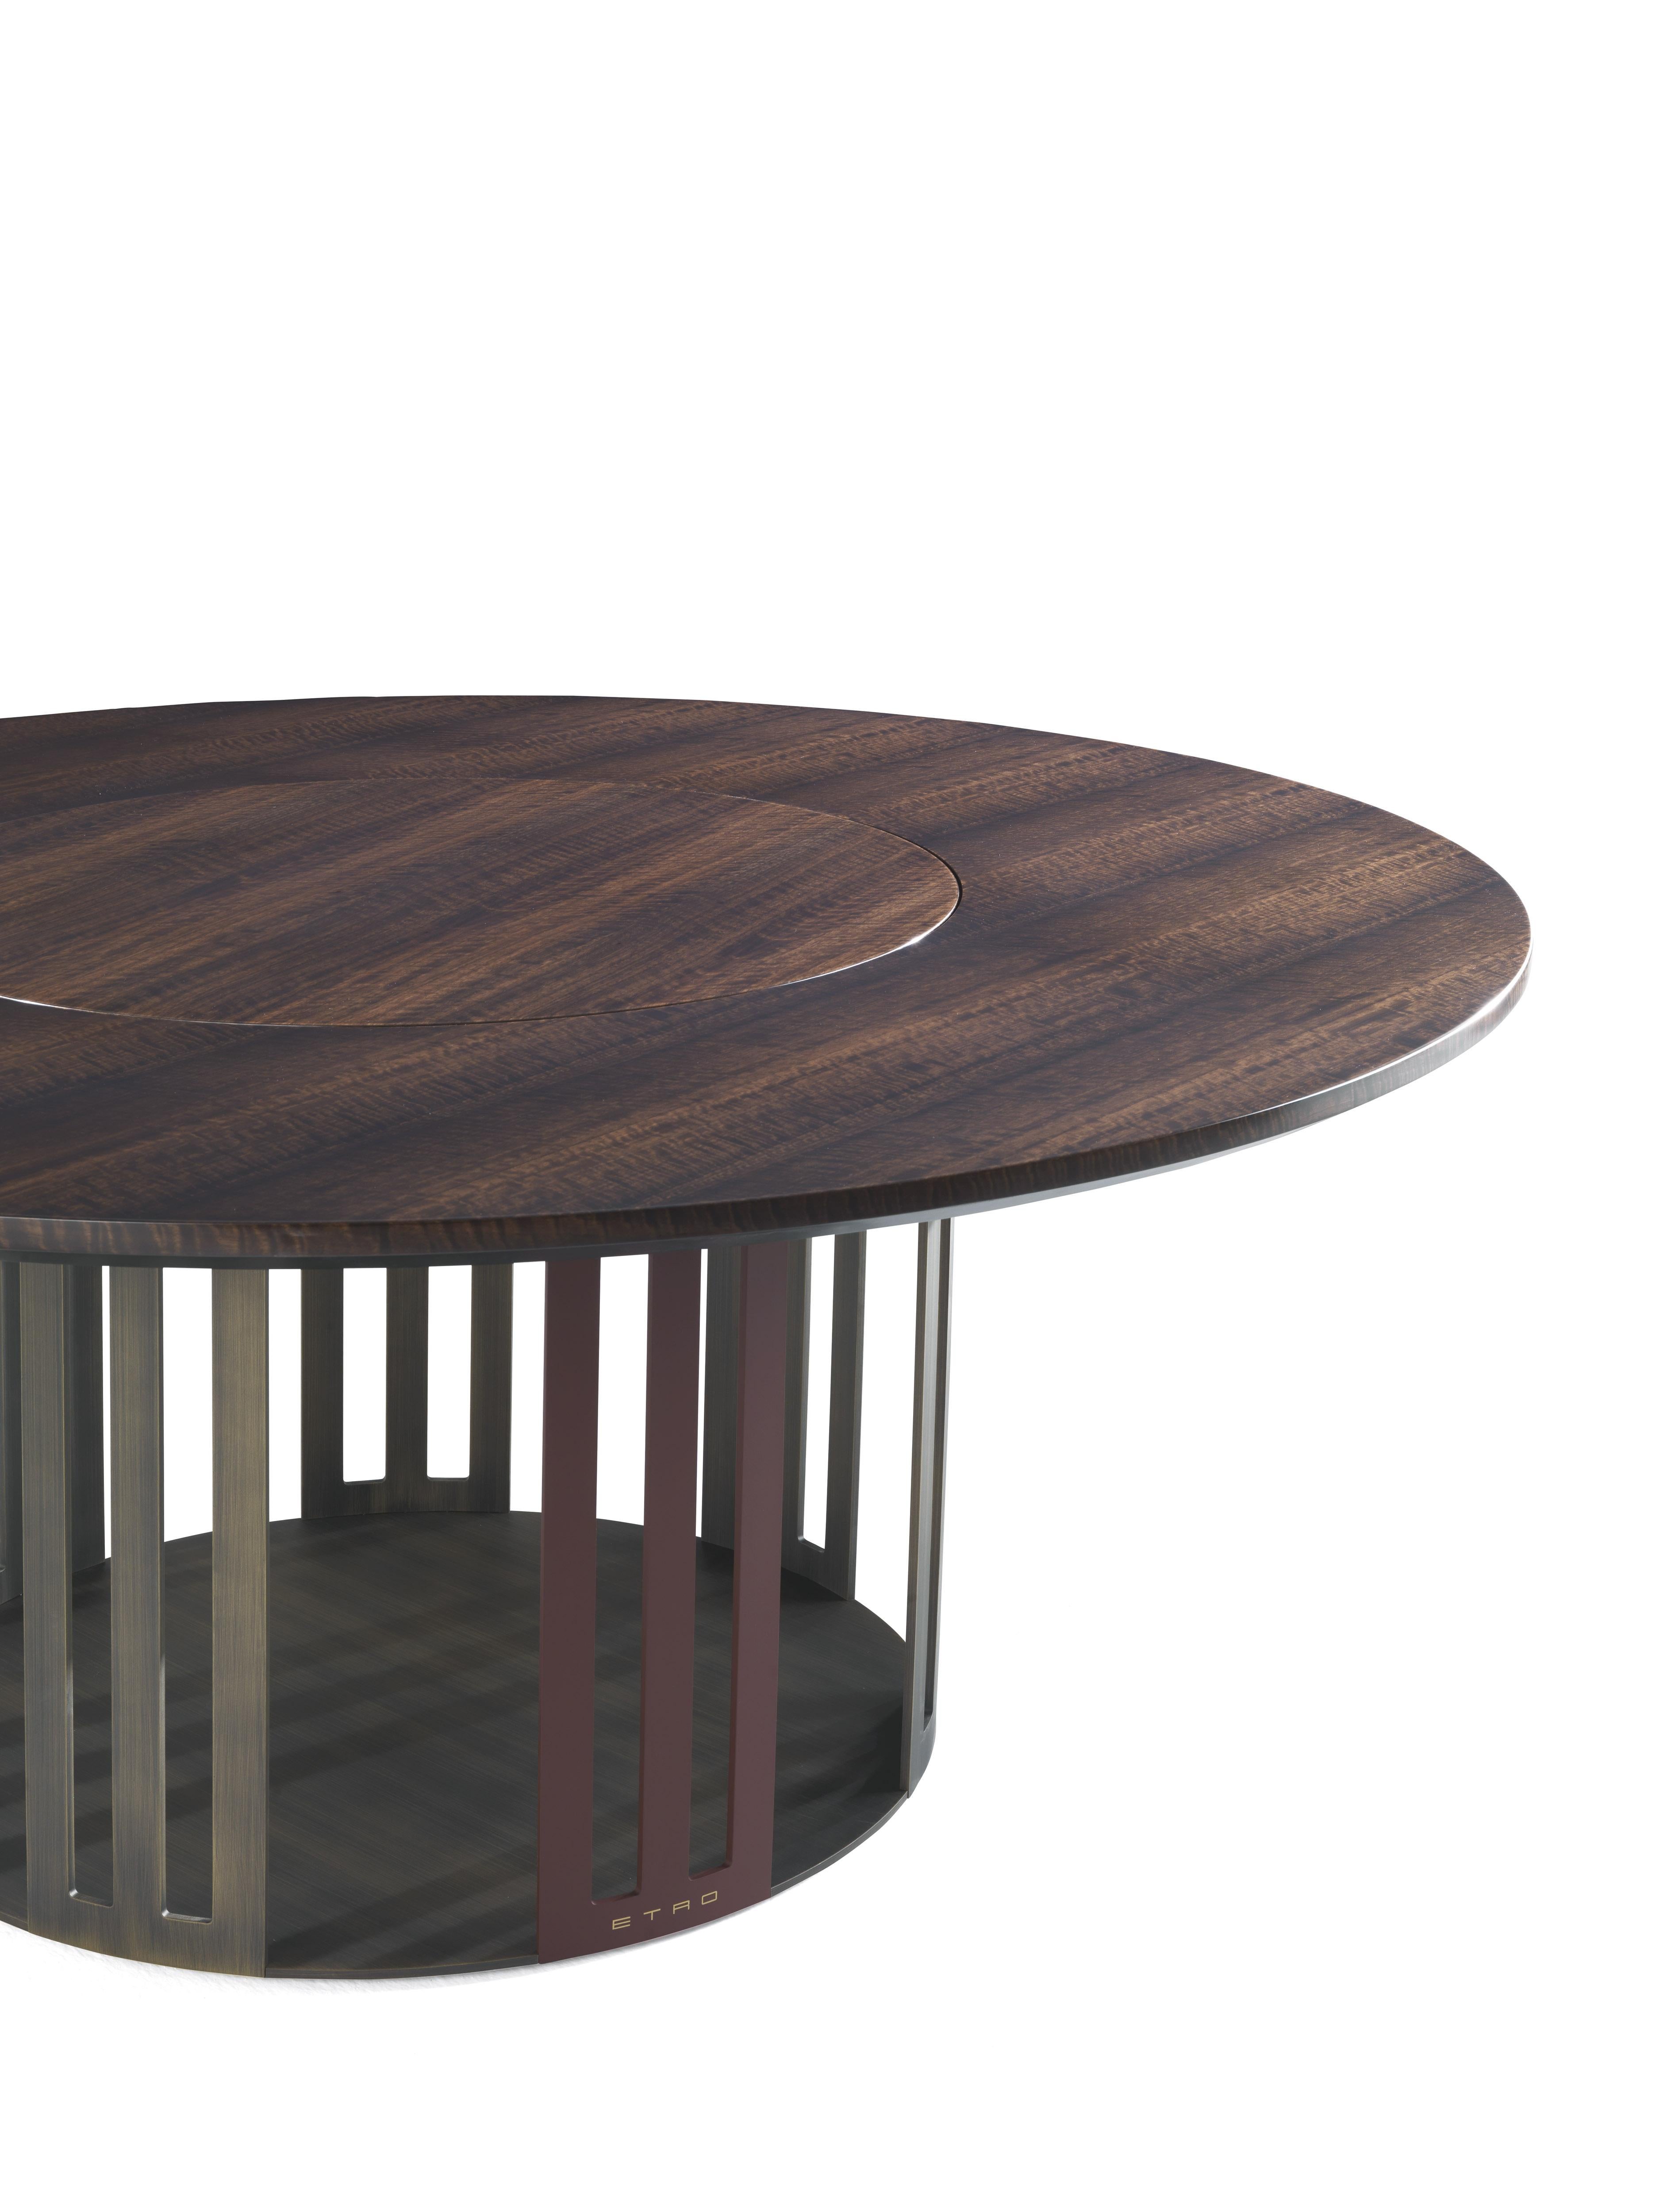 round wood table